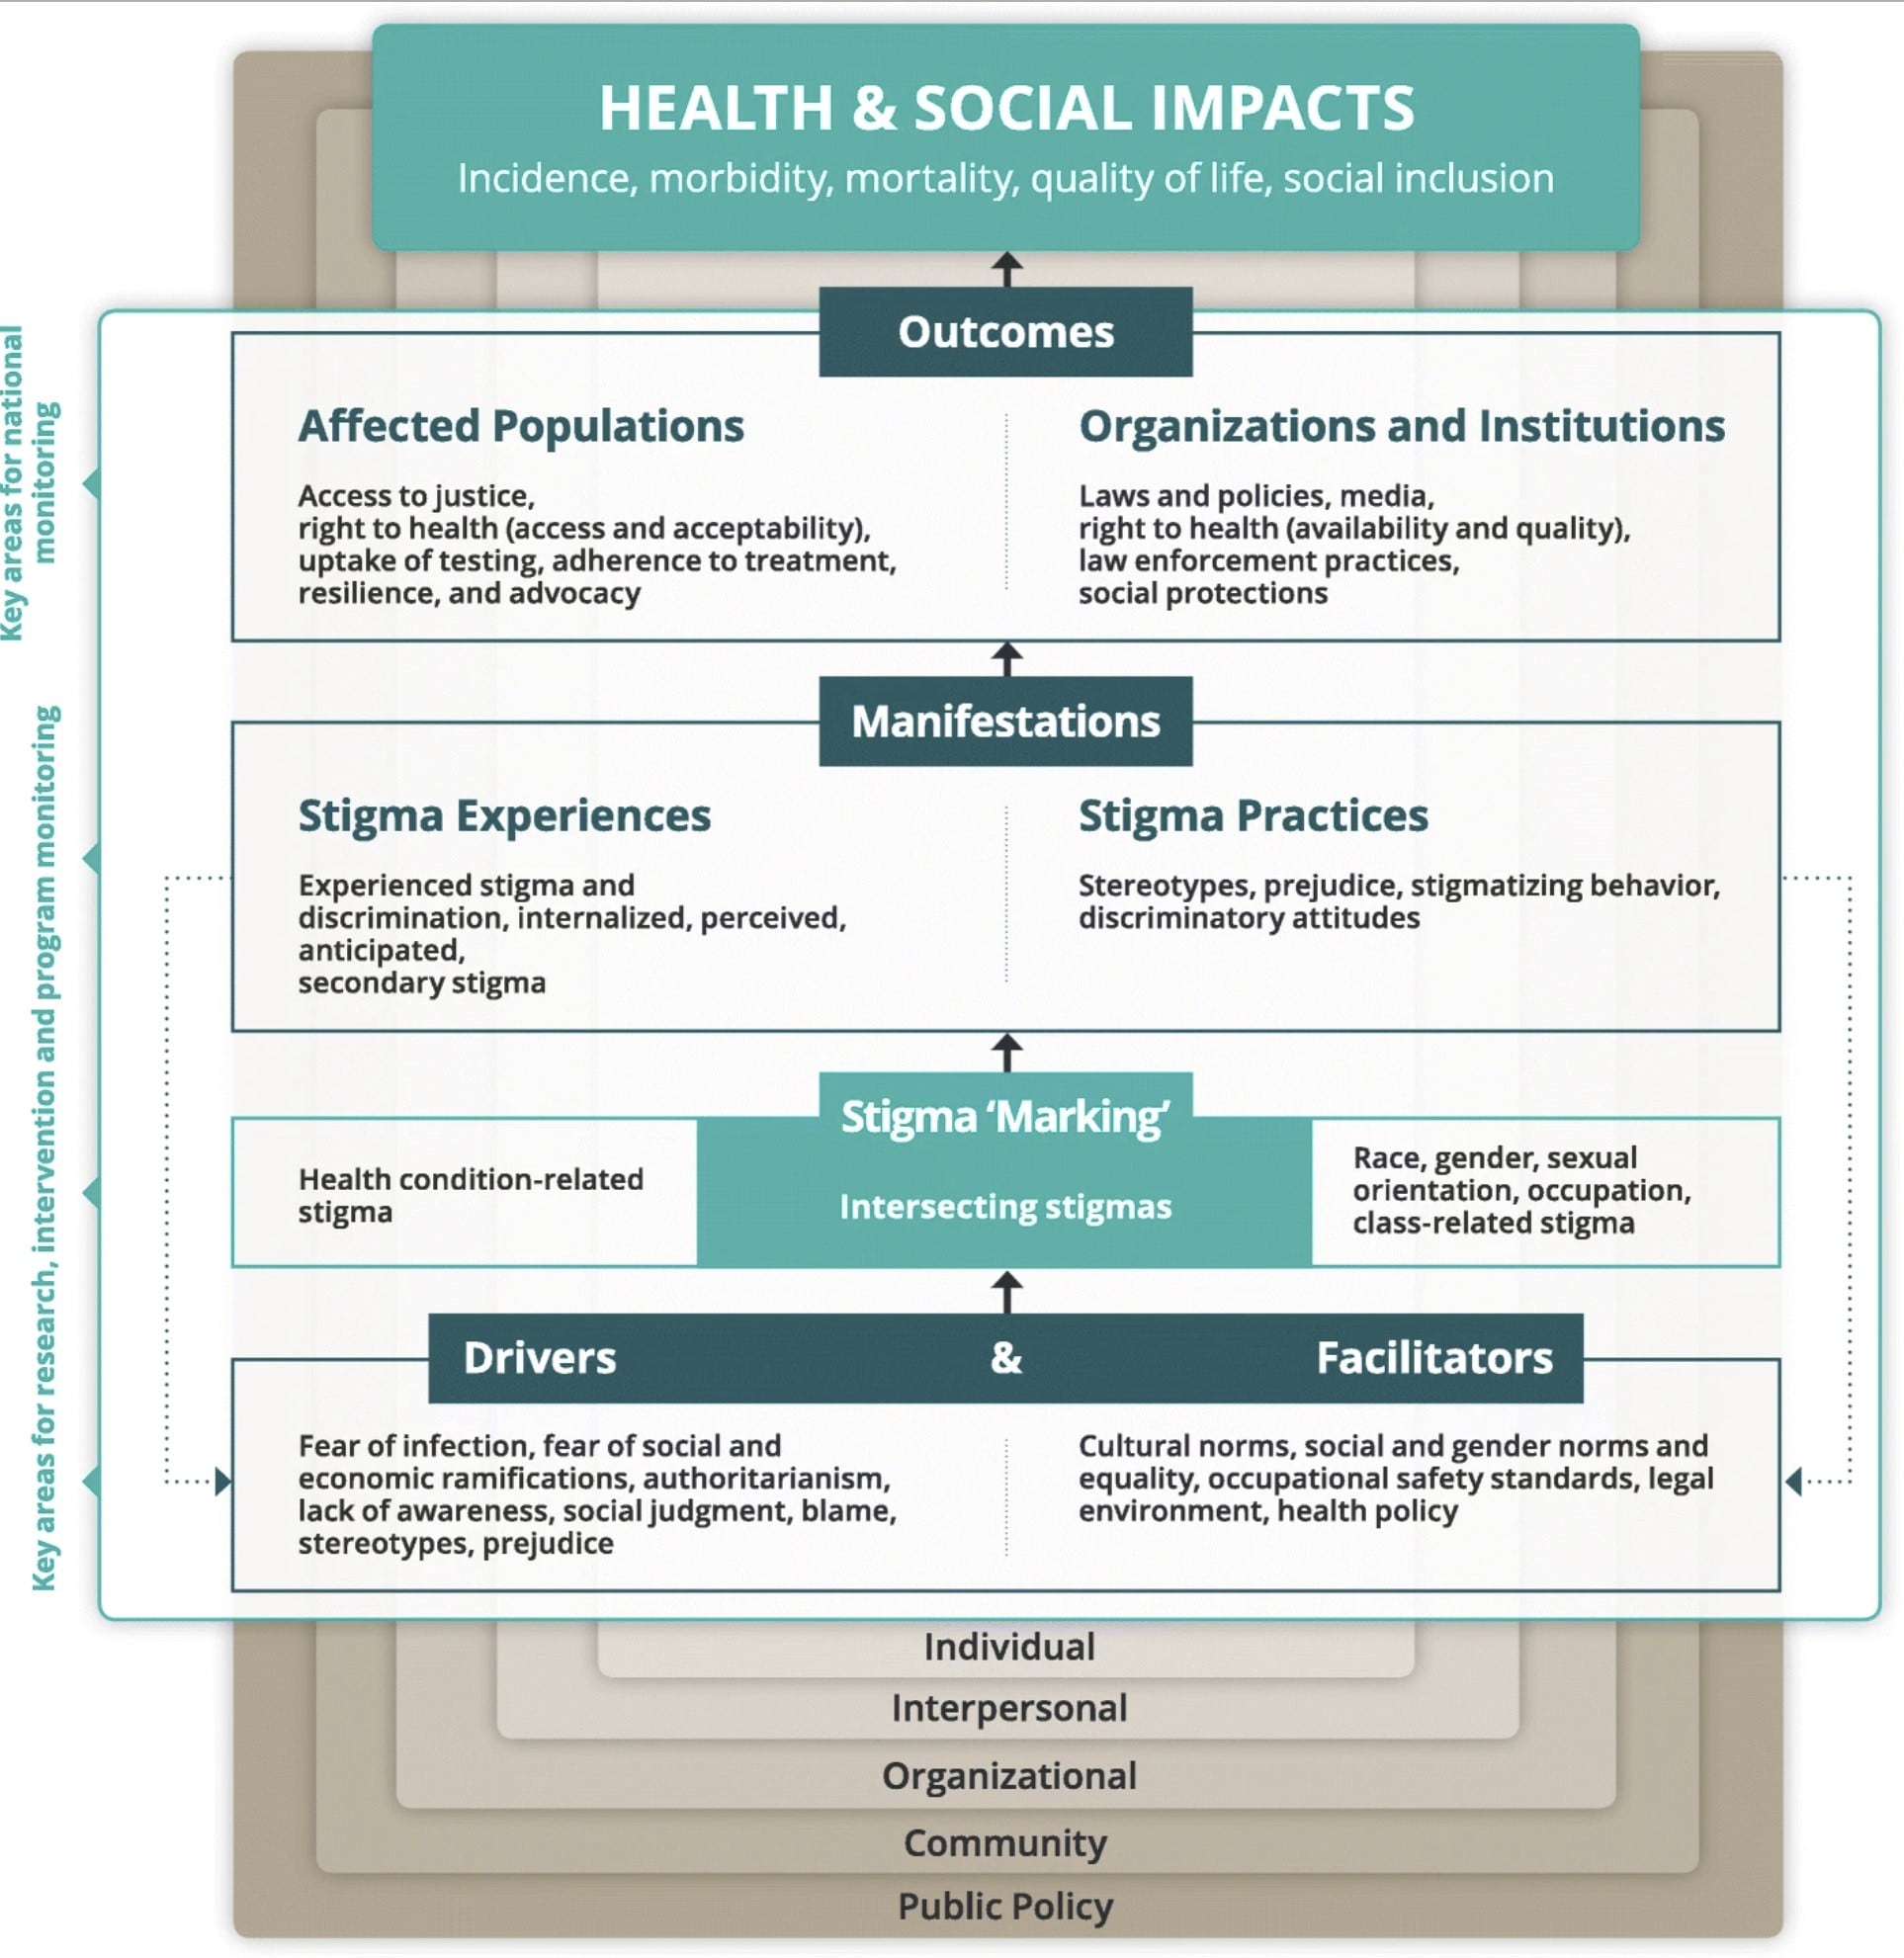 Health and Social Impacts.